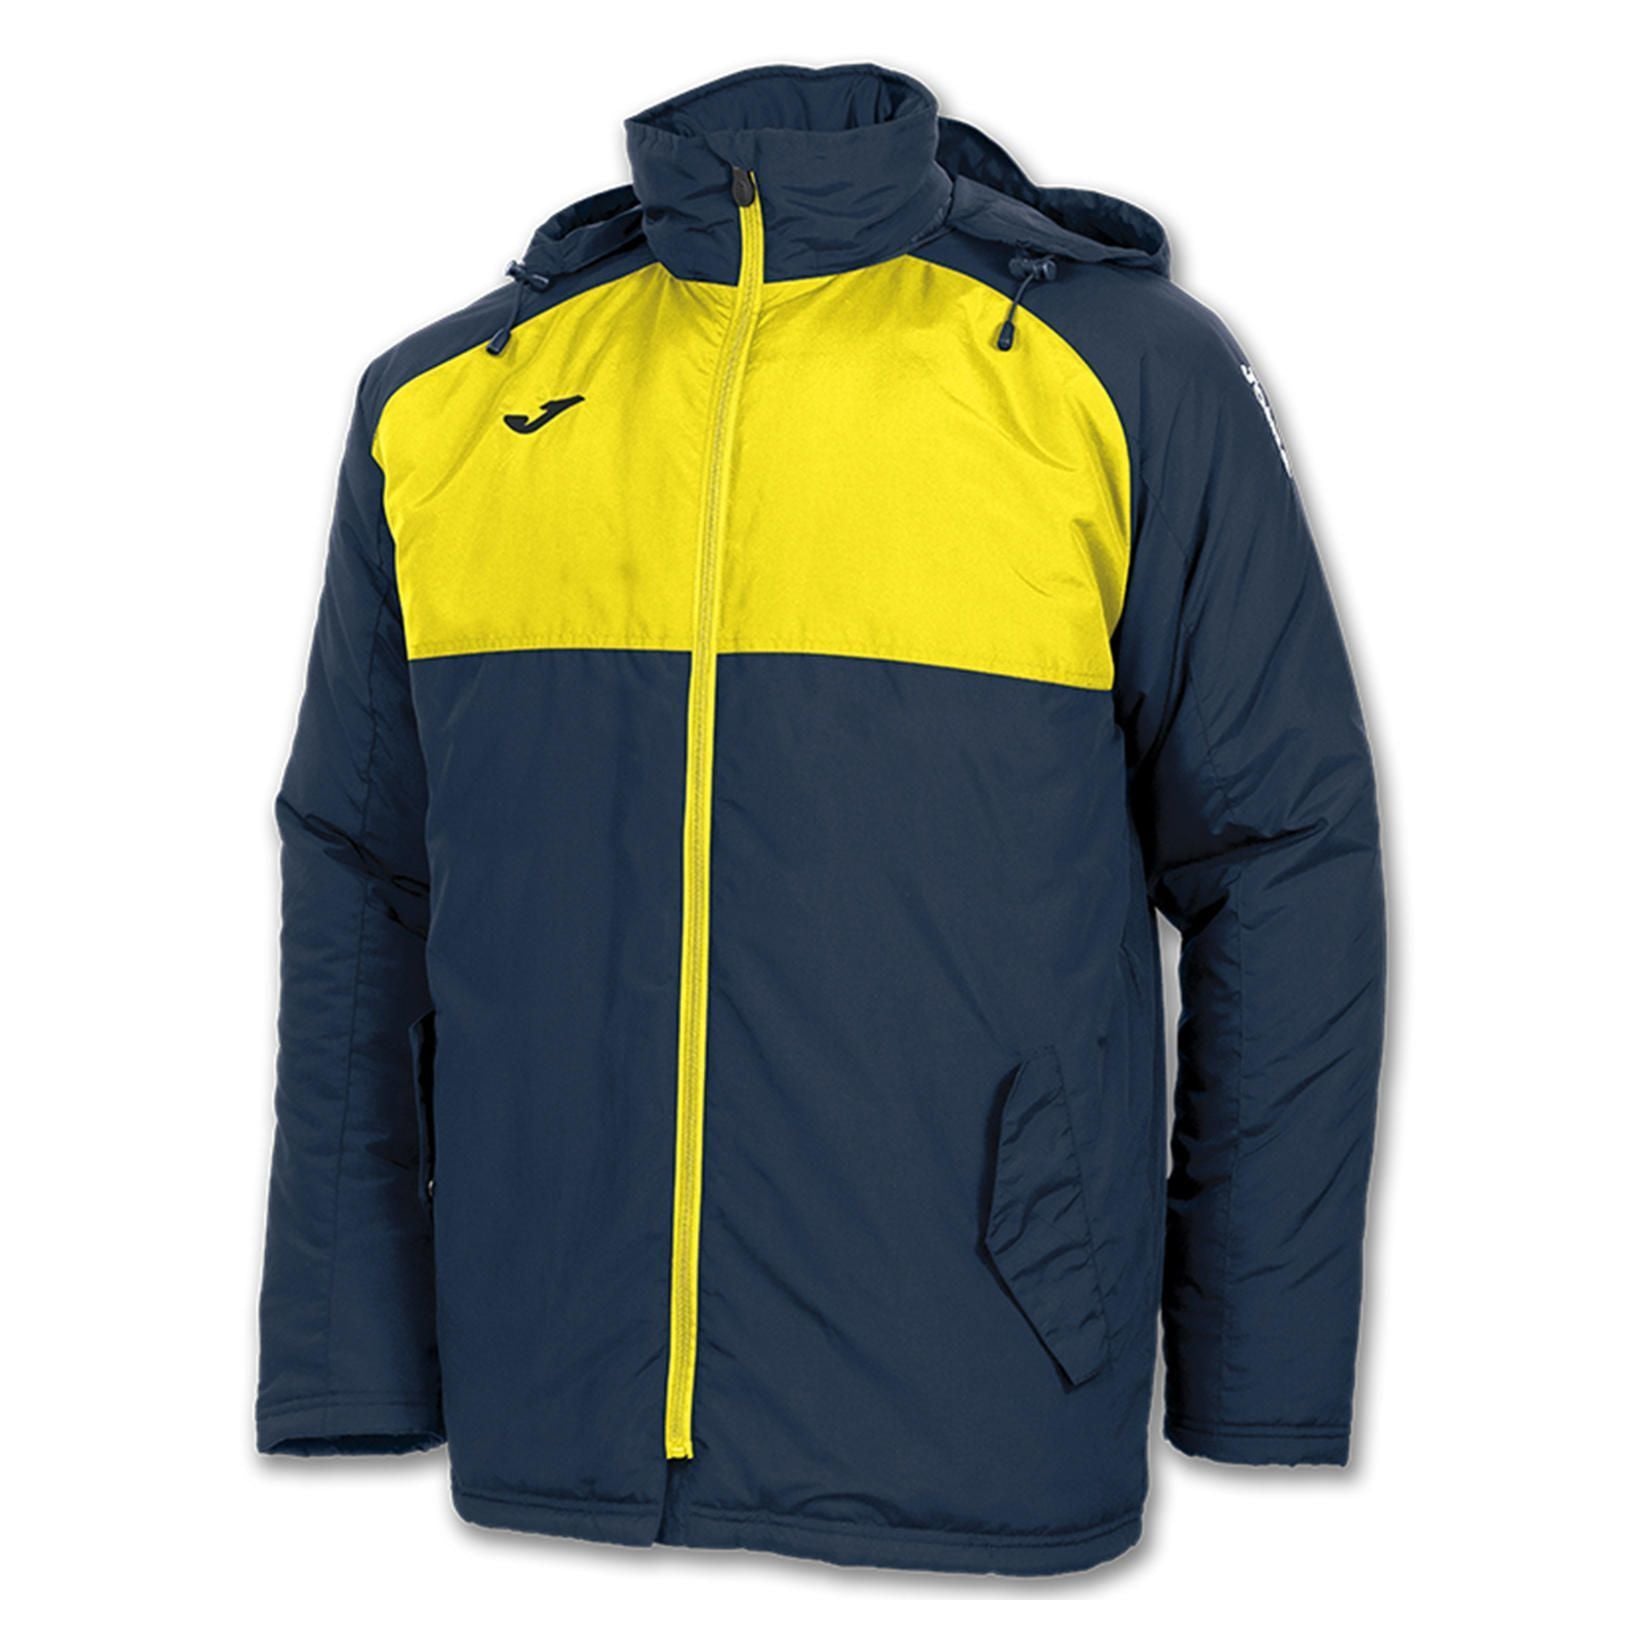 Joma Andes Winter Jacket (Youth) - Navy/Yellow